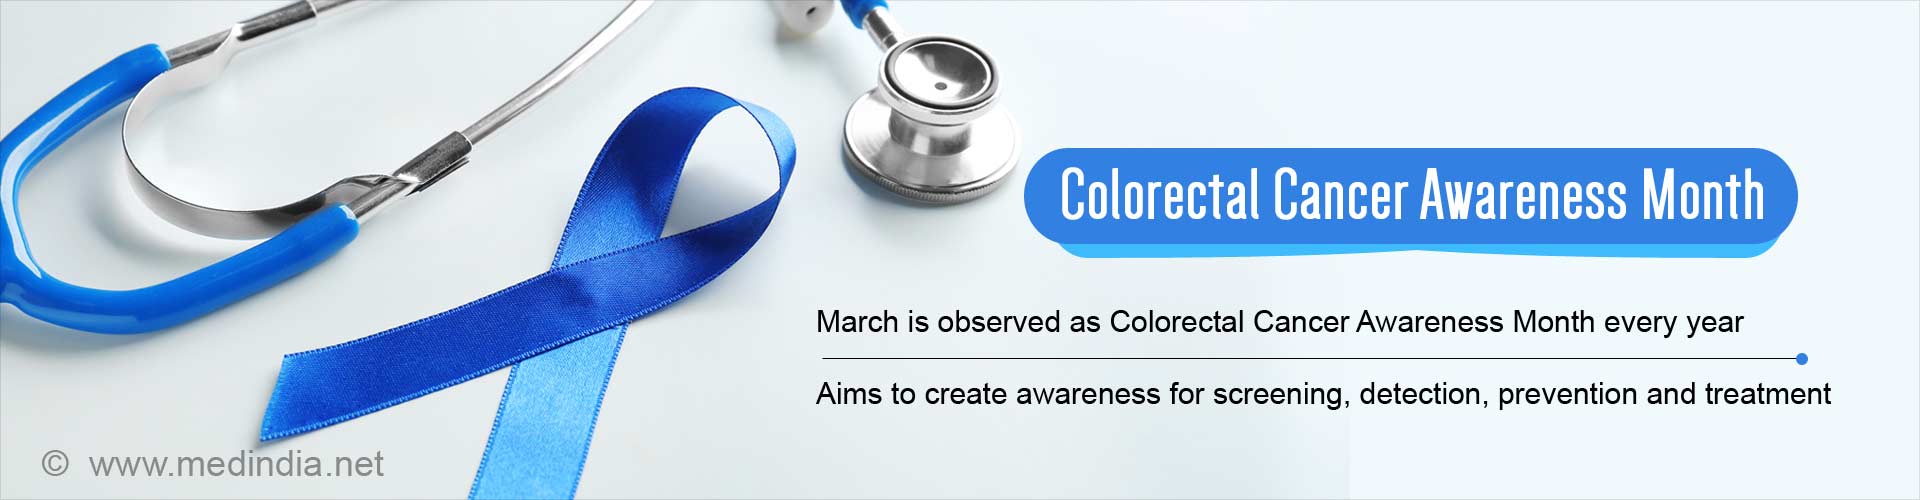 colorectal cancer awareness month
- march is observed as colorectal cancer awareness month every year
- aims to create awareness for screening, detection, prevention and treatment